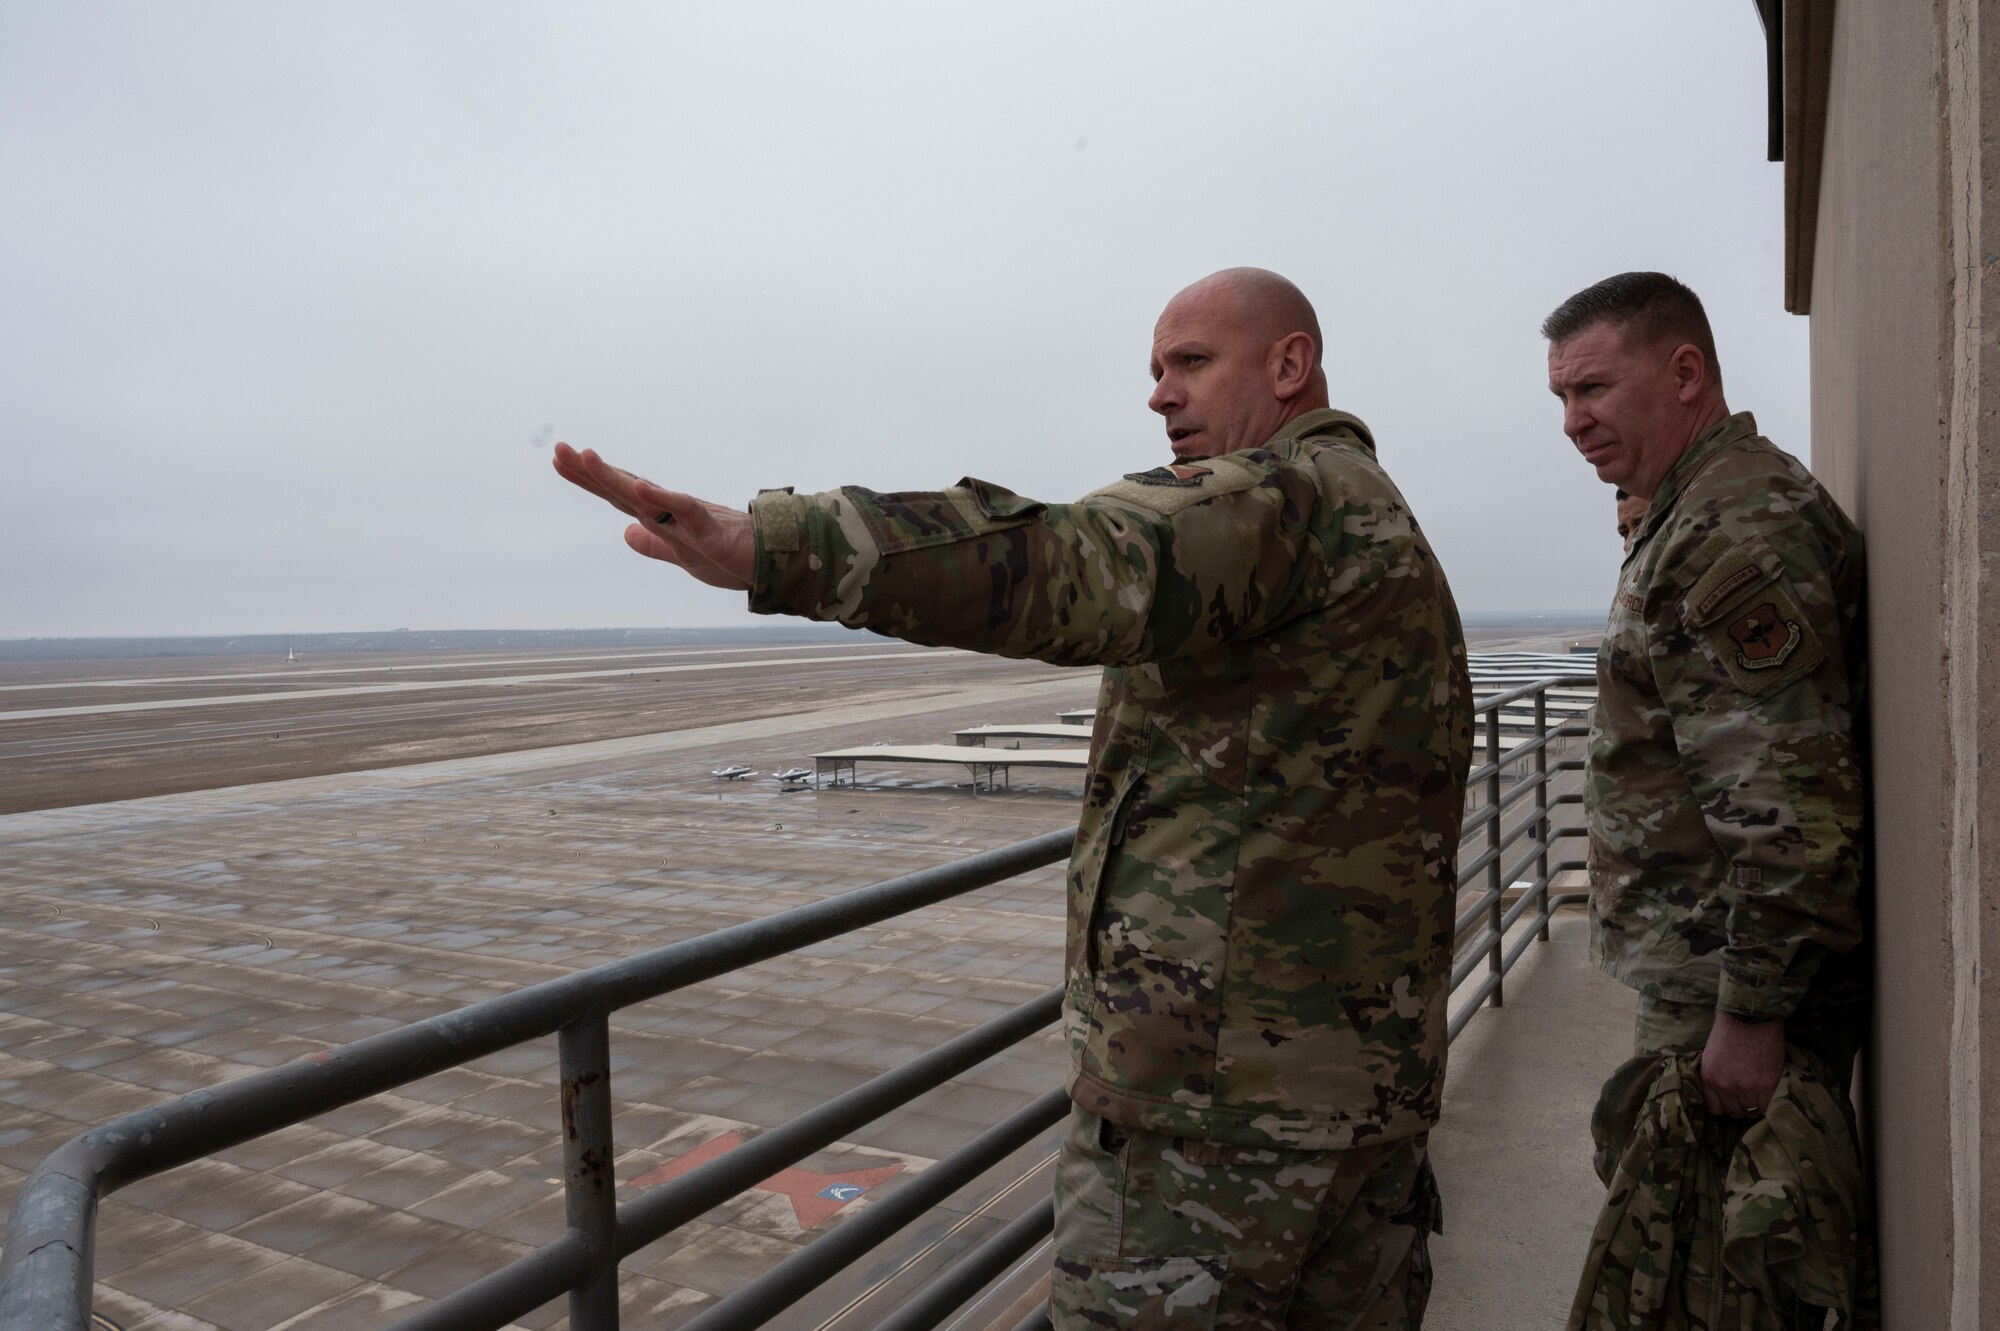 U.S. Air Force Col. Kevin Davidson (left), 47th Flying Training Wing commander, shows Chief Master Sgt. Chad Bickley (right), command chief for Air Education and Training Command, the aircraft and sunshades on the flight line at Laughlin Air Force Base, Texas, Jan. 22, 2024. Bickley visited Laughlin to meet the people producing combat-ready Airmen, leaders and pilots. (U.S. Air Force photo by Senior Airman Kailee Reynolds)